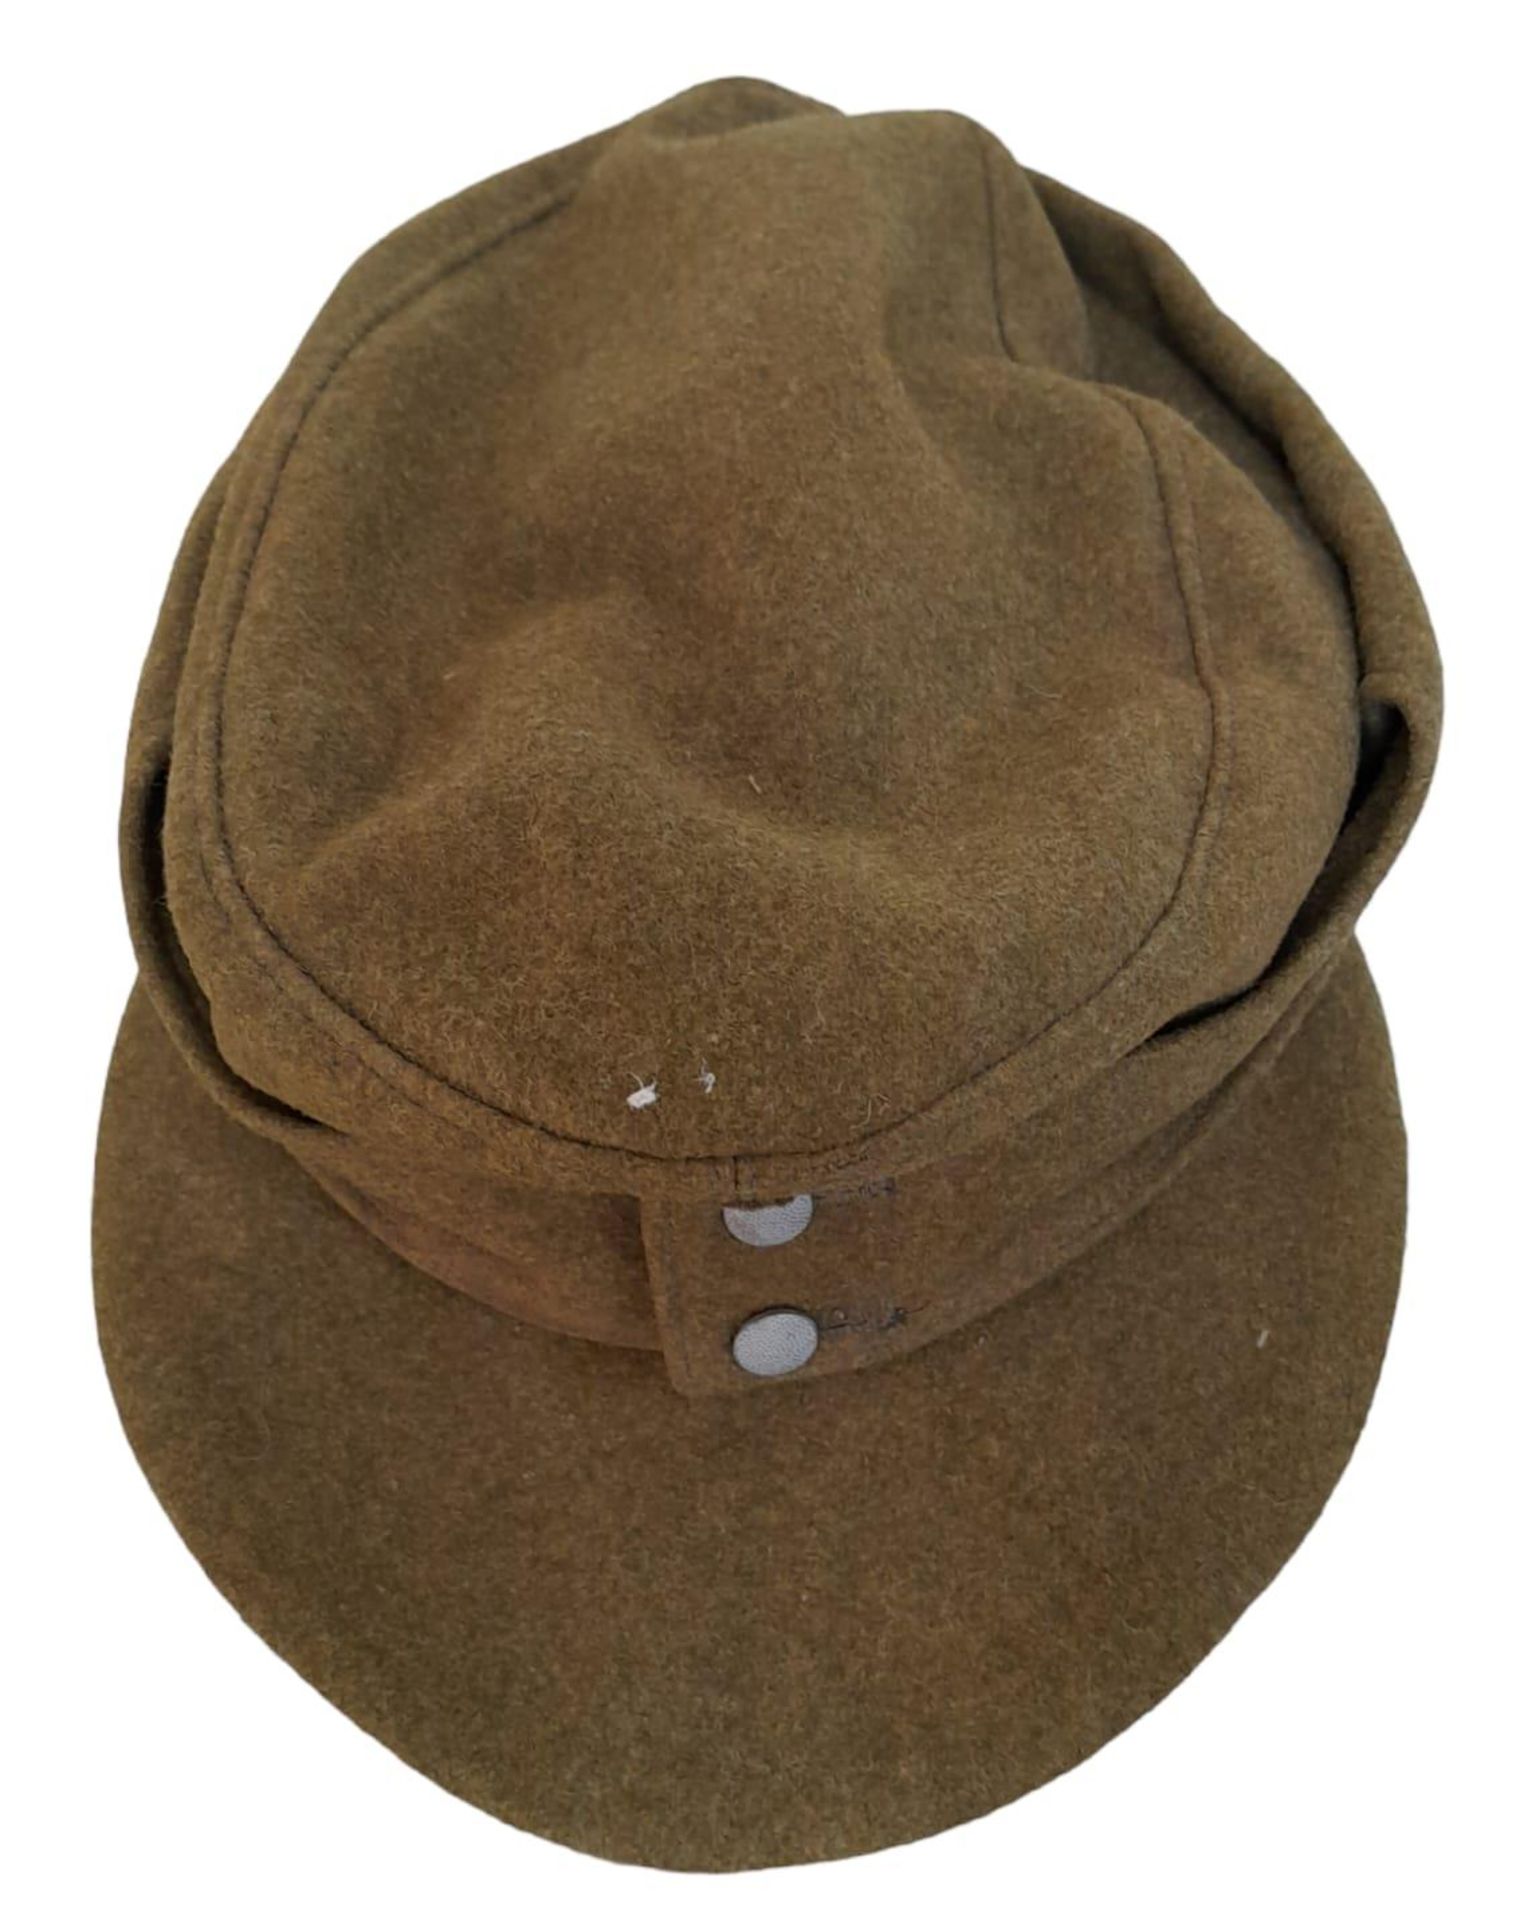 WW2 German RAD (Labour Corps) M43 Enlisted Mans/Nco’s Cap. - Image 5 of 11